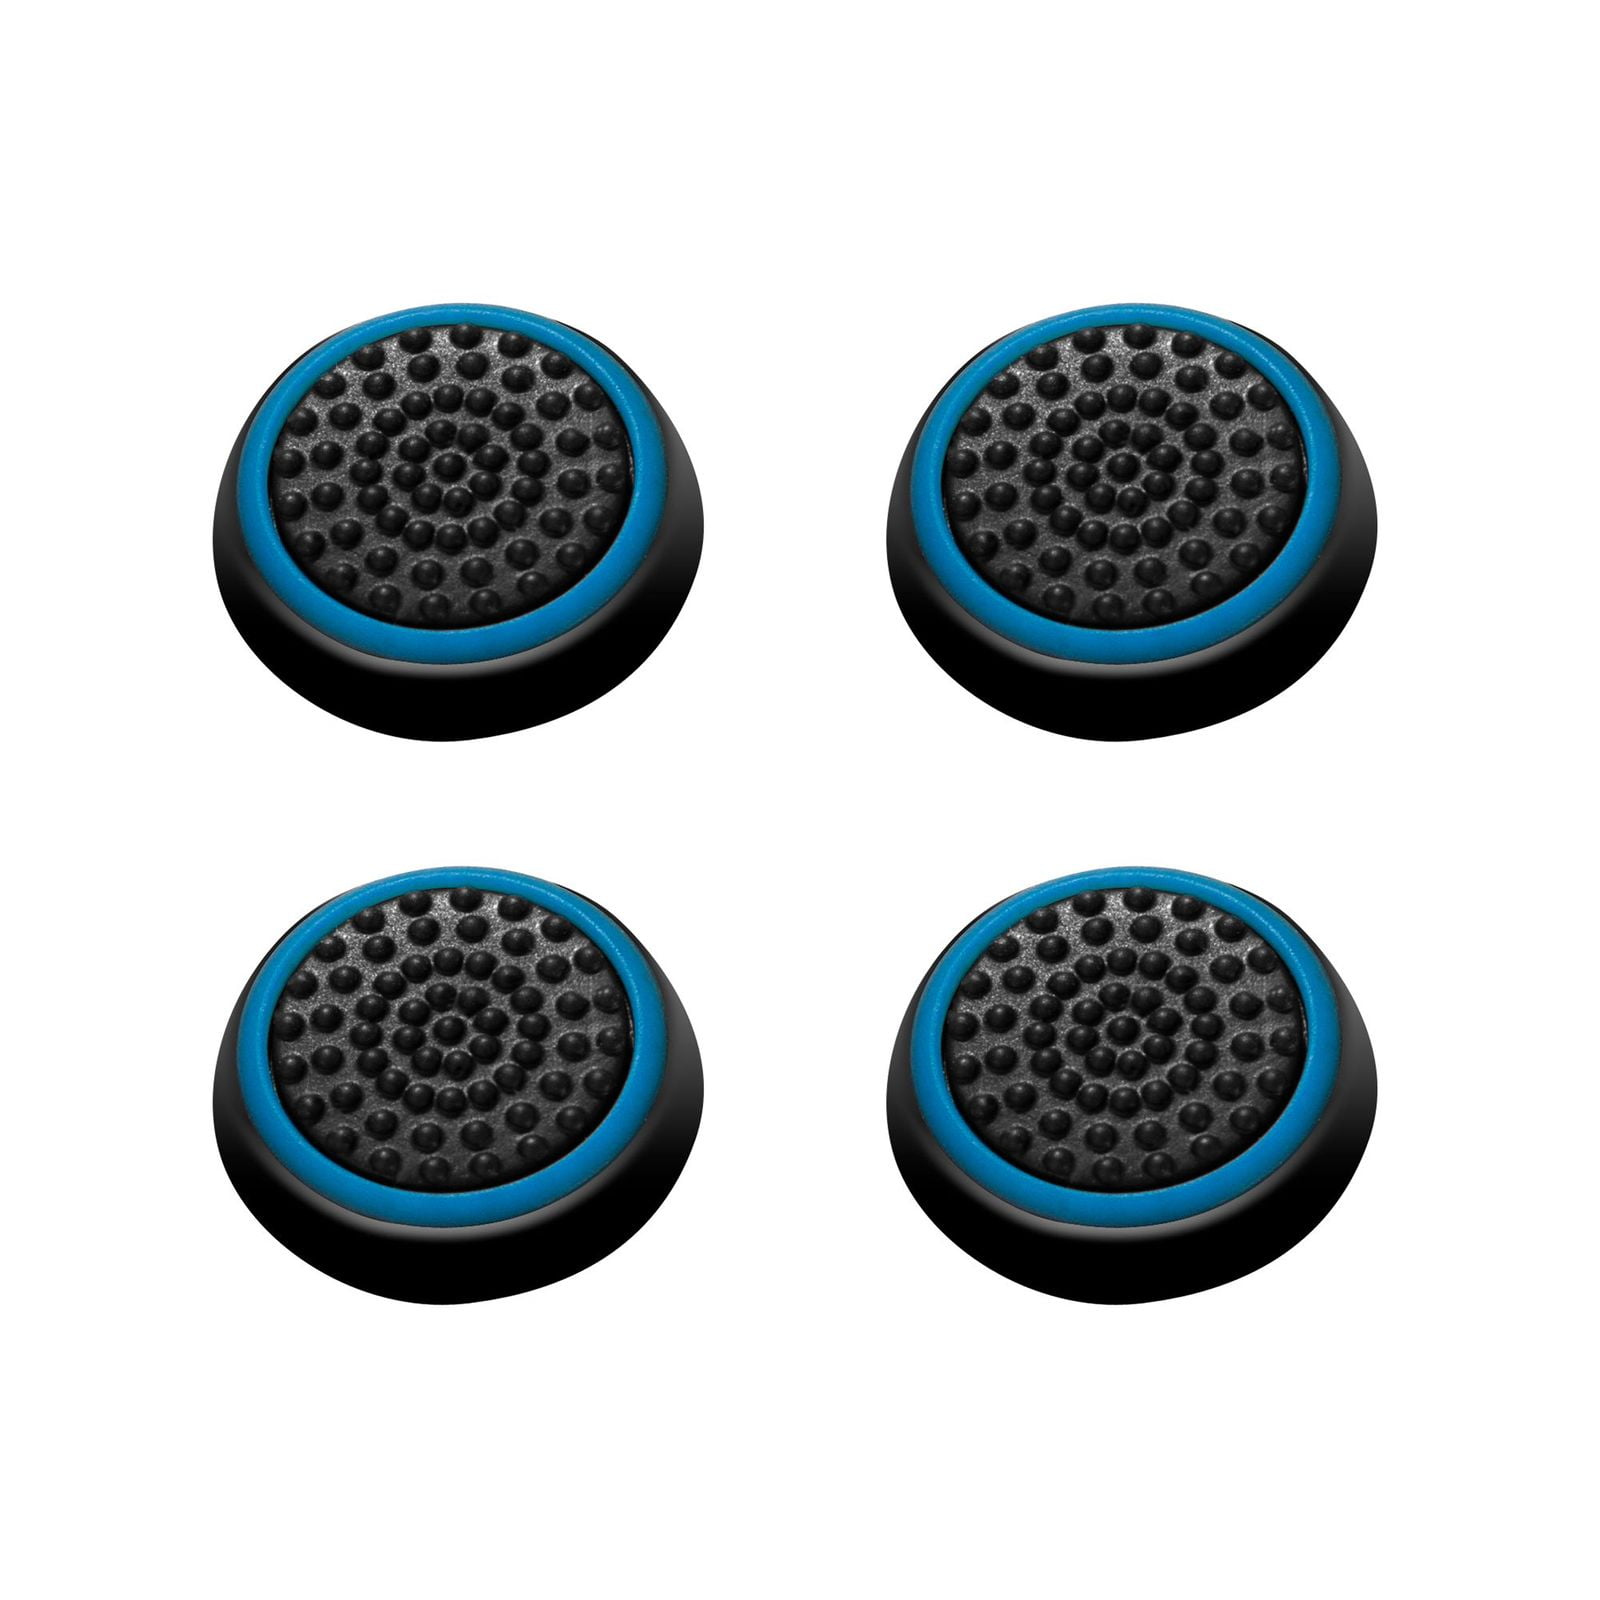 Silicone Analog Controller Joystick Thumb Stick Grips Cap Cover For PS3 PS4 Xbox 360 Xbox One